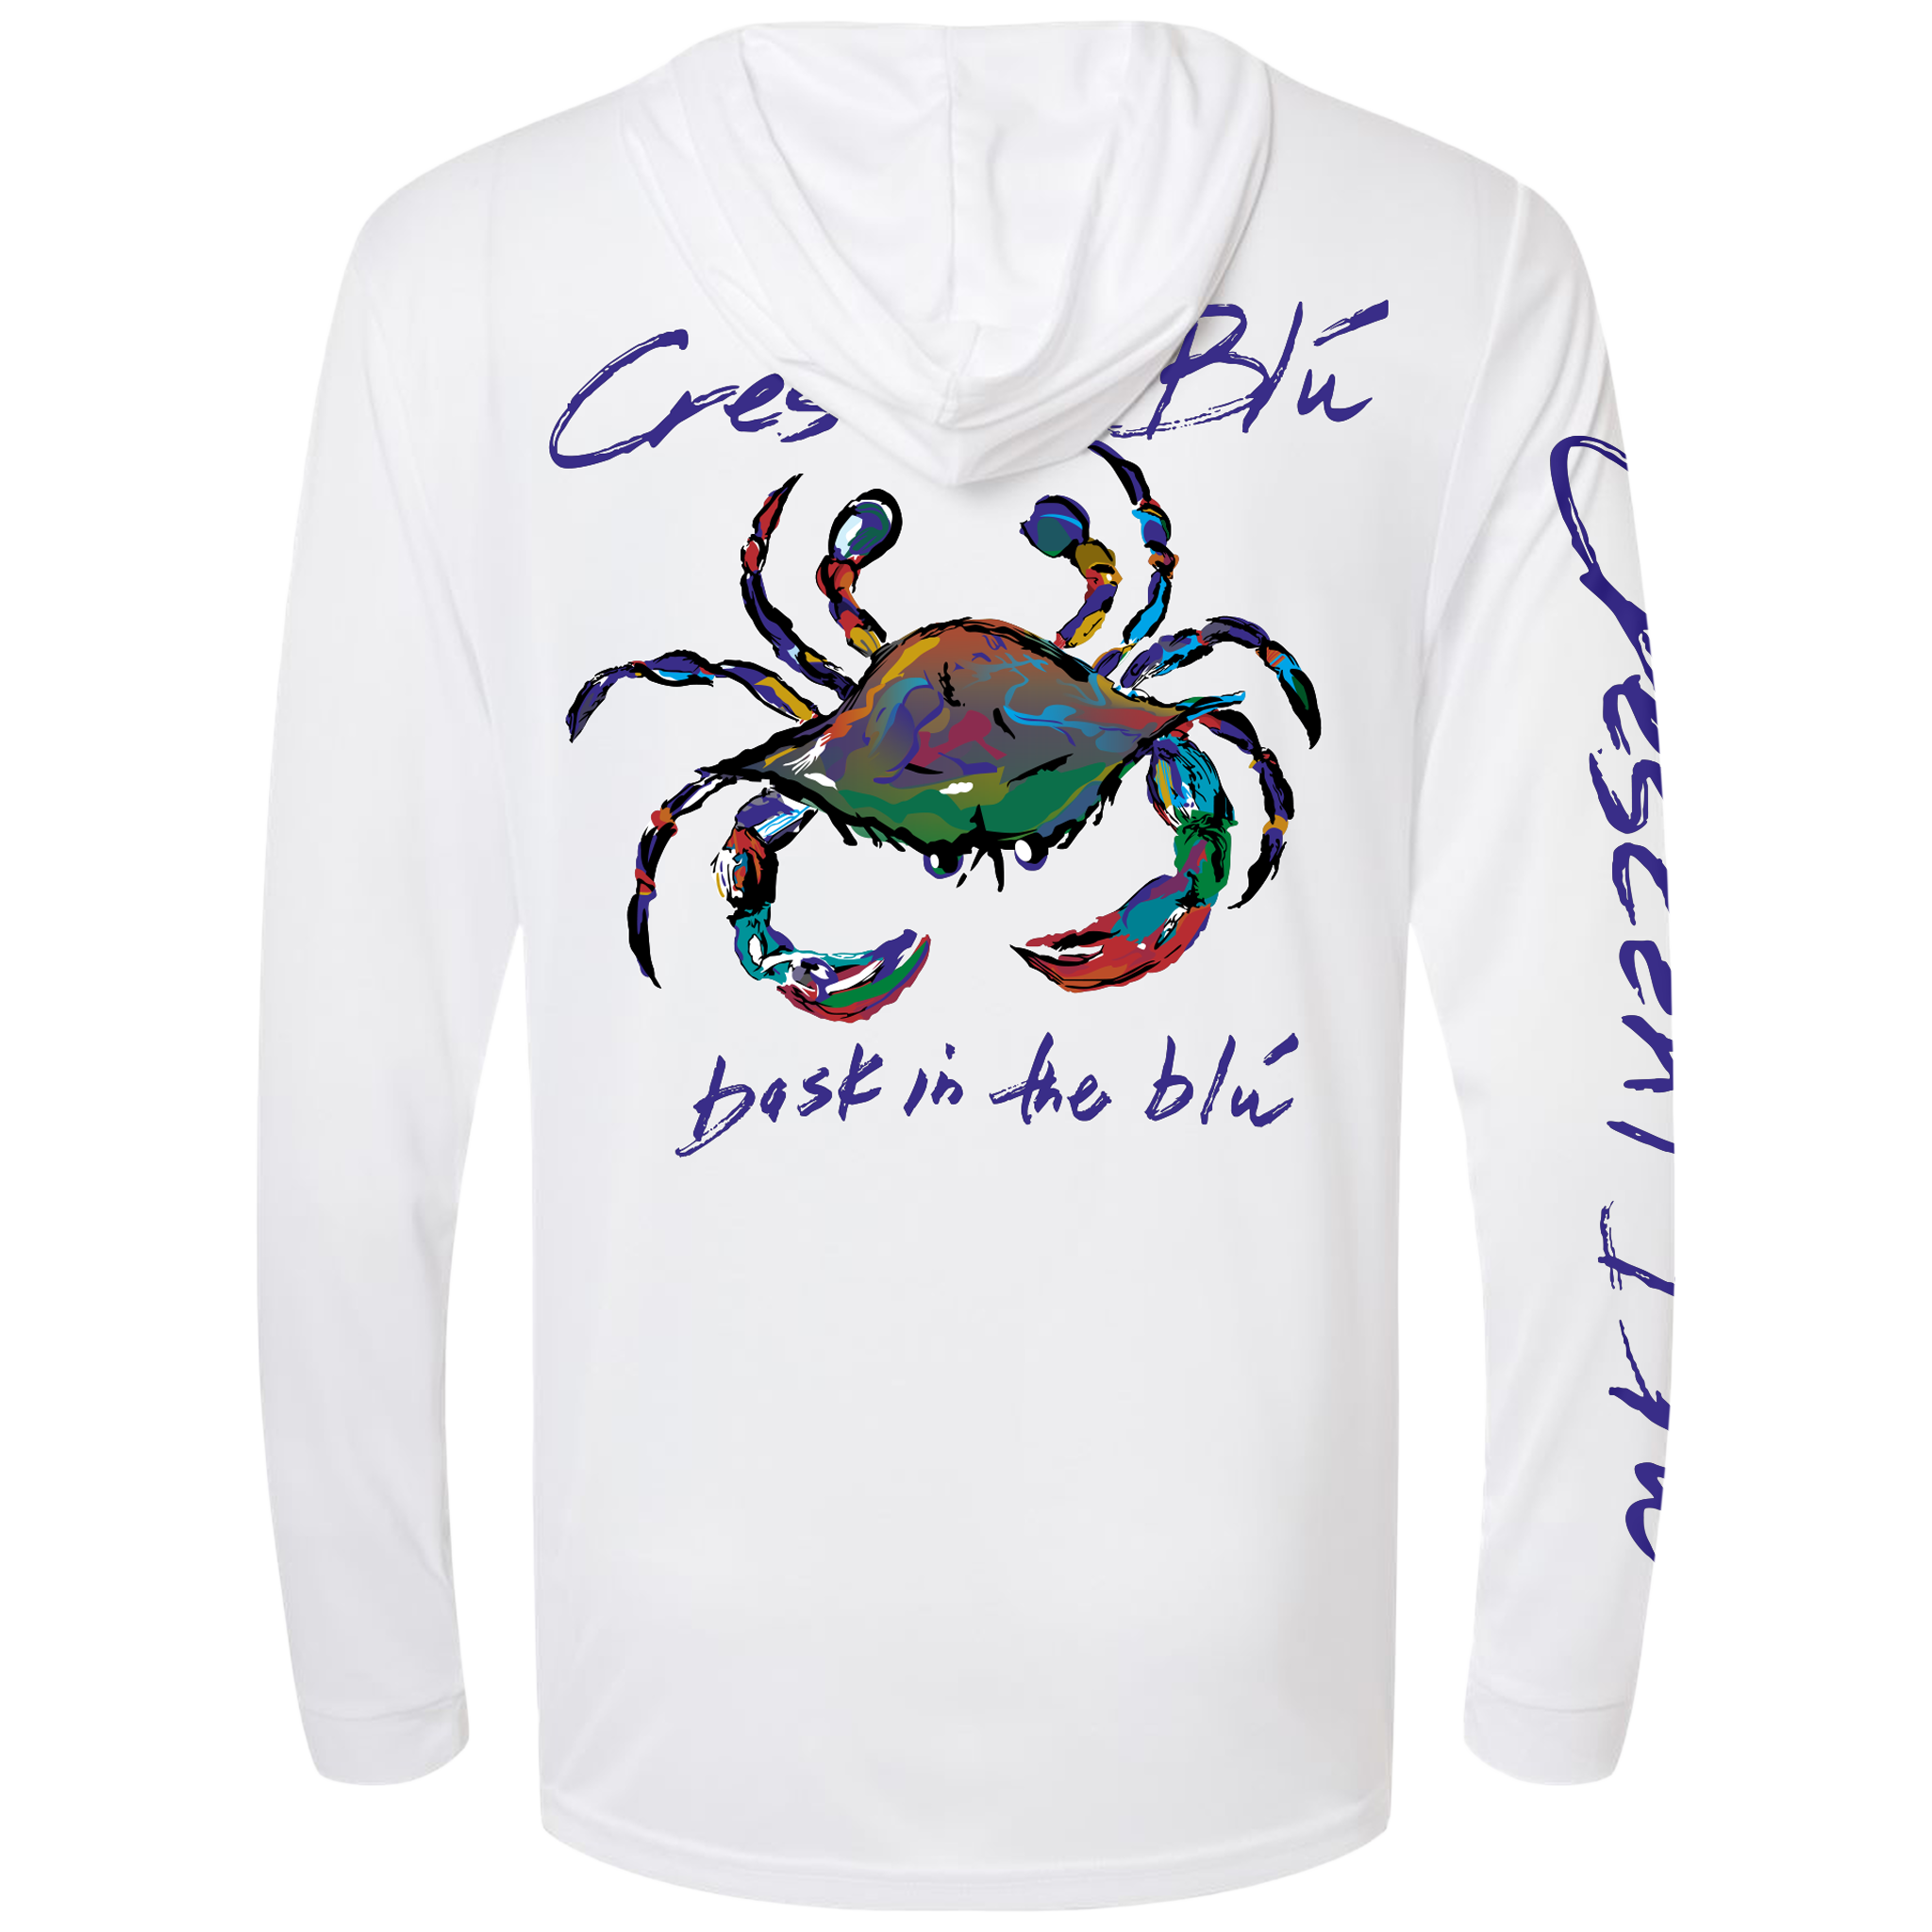 White Hoodie long sleeve Performance Sun Shirt with UPF 50+. Crescent Blu written on the right sleeve. Large multi-colored crab logo featured on the back. 